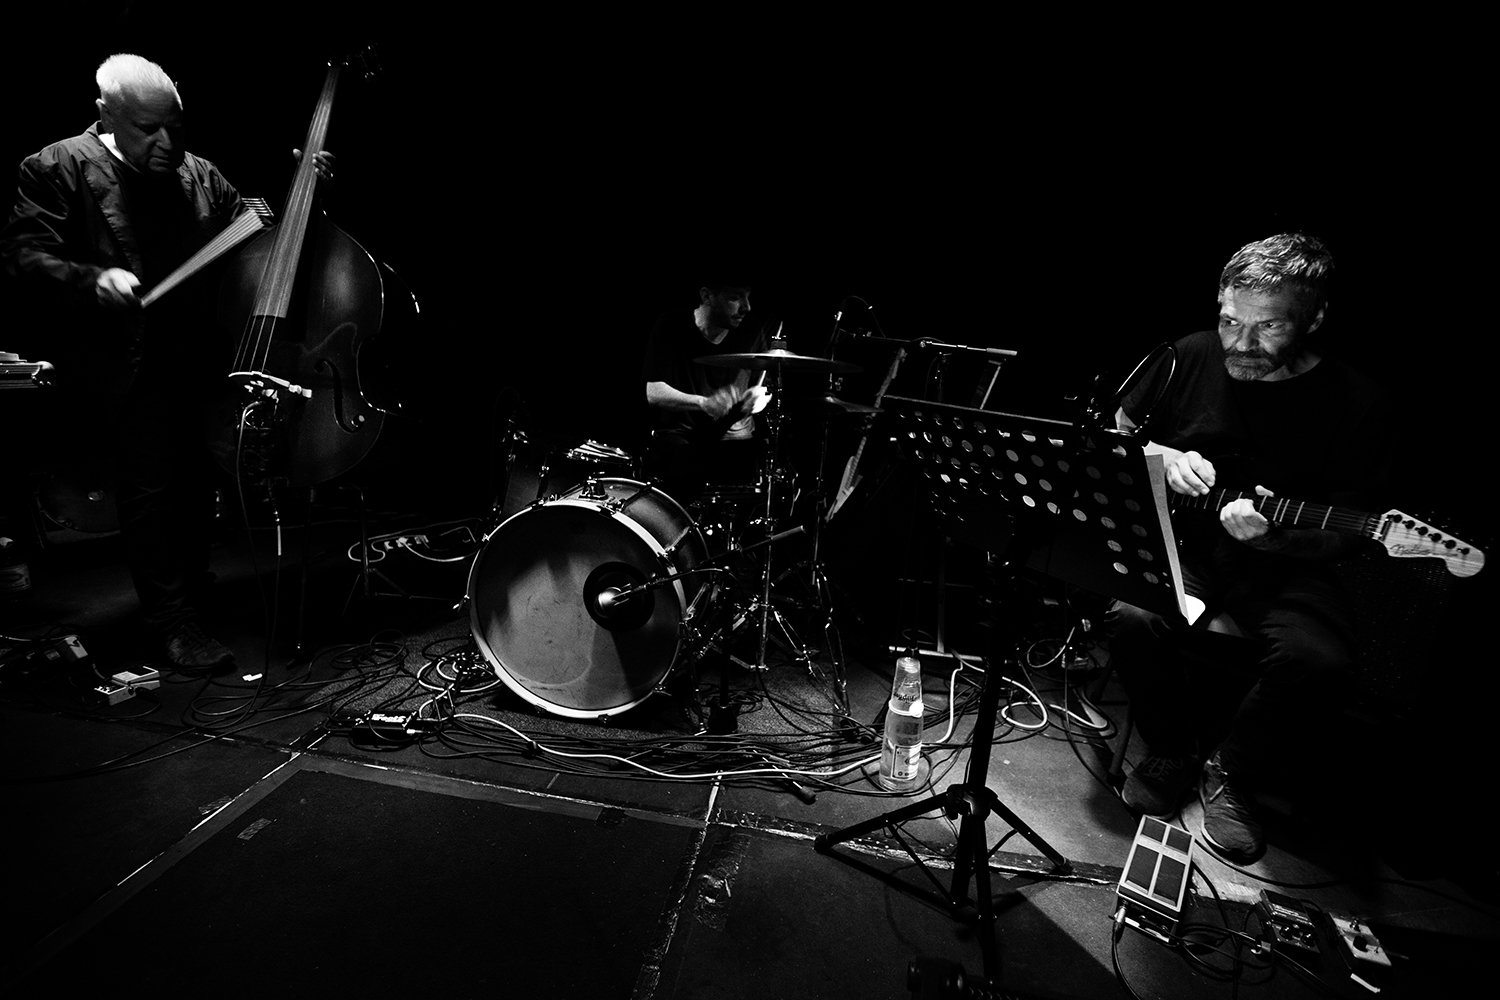 Arnold Dreyblatt & The Orchestra of Excited Strings by Laurent Orseau - Concert - Les Ateliers Claus - Brussels, Belgium #2